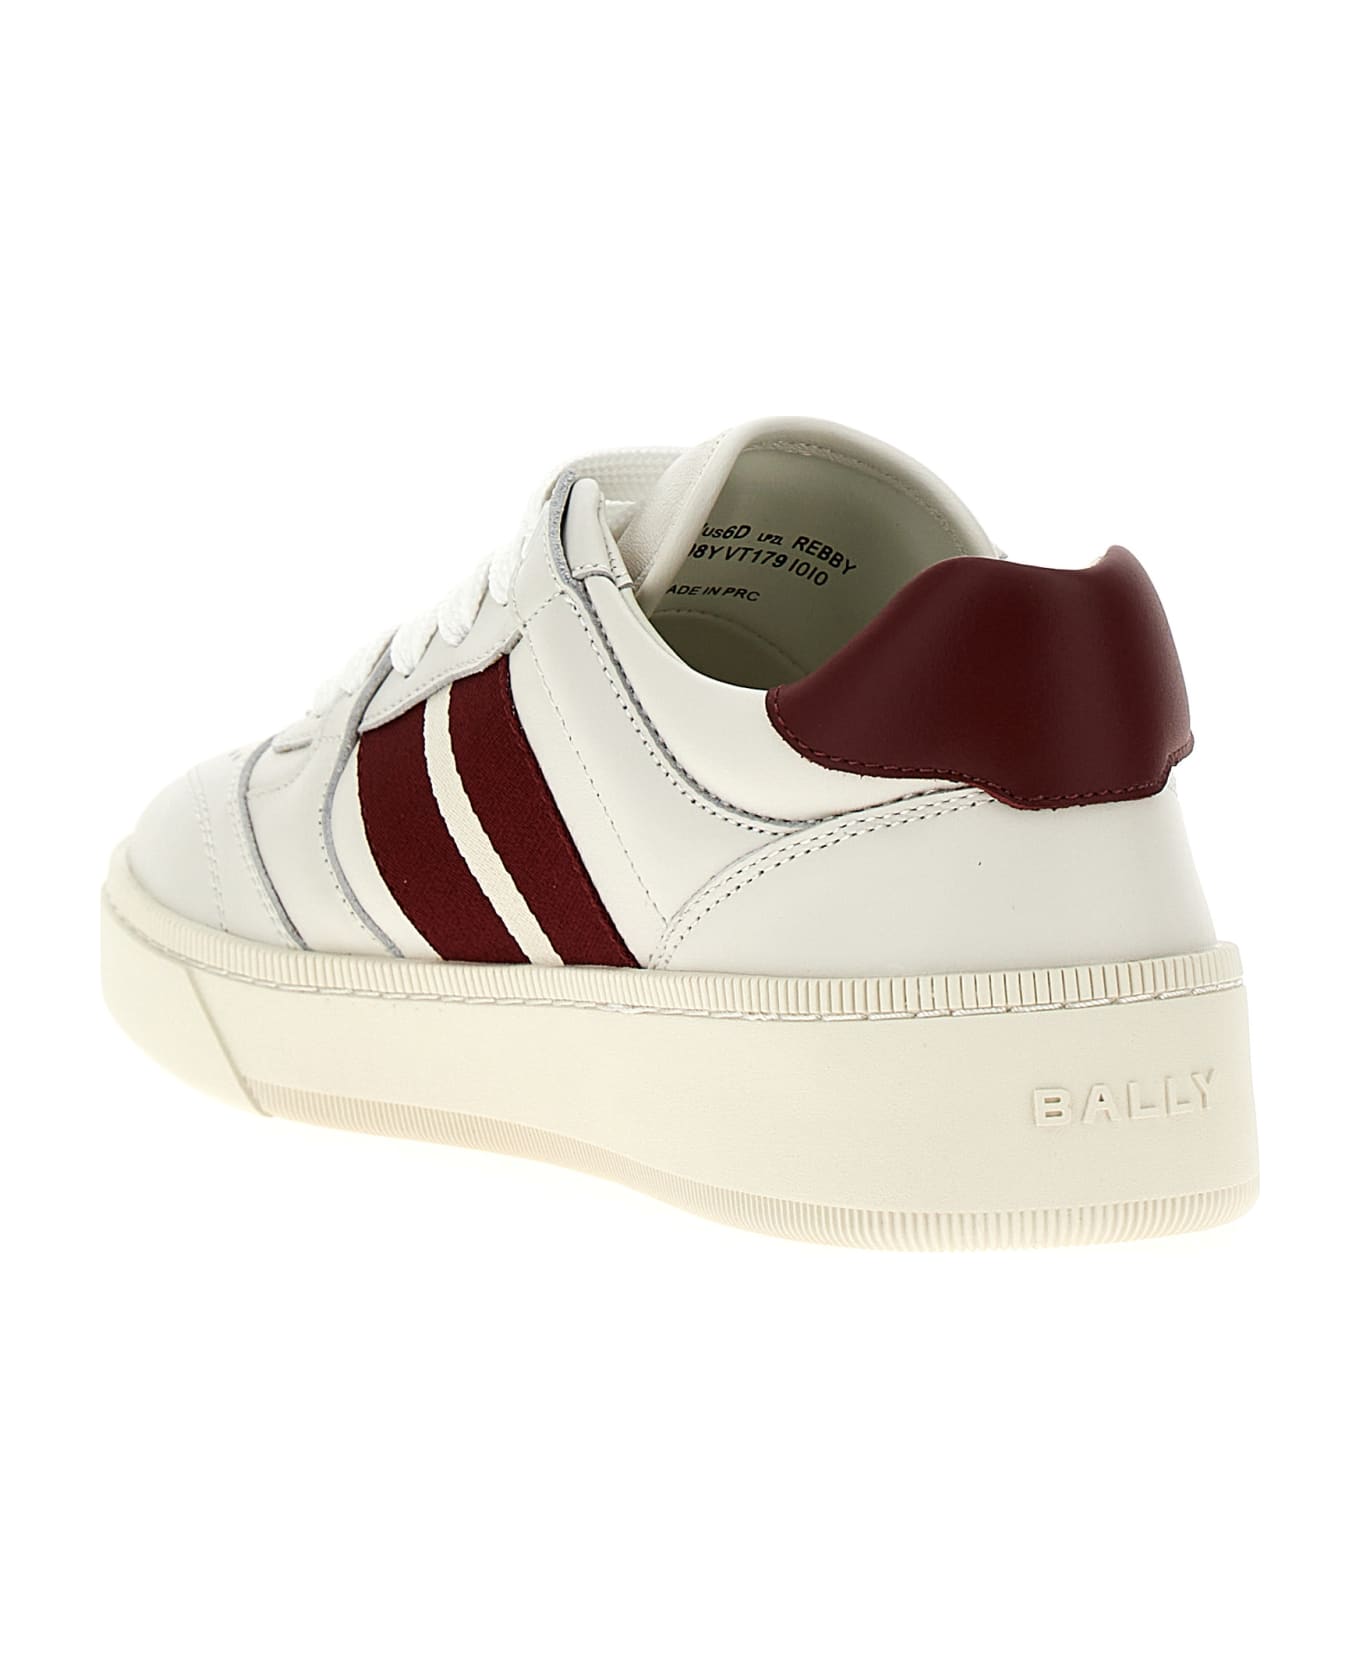 Bally 'rebby' Sneakers - Red